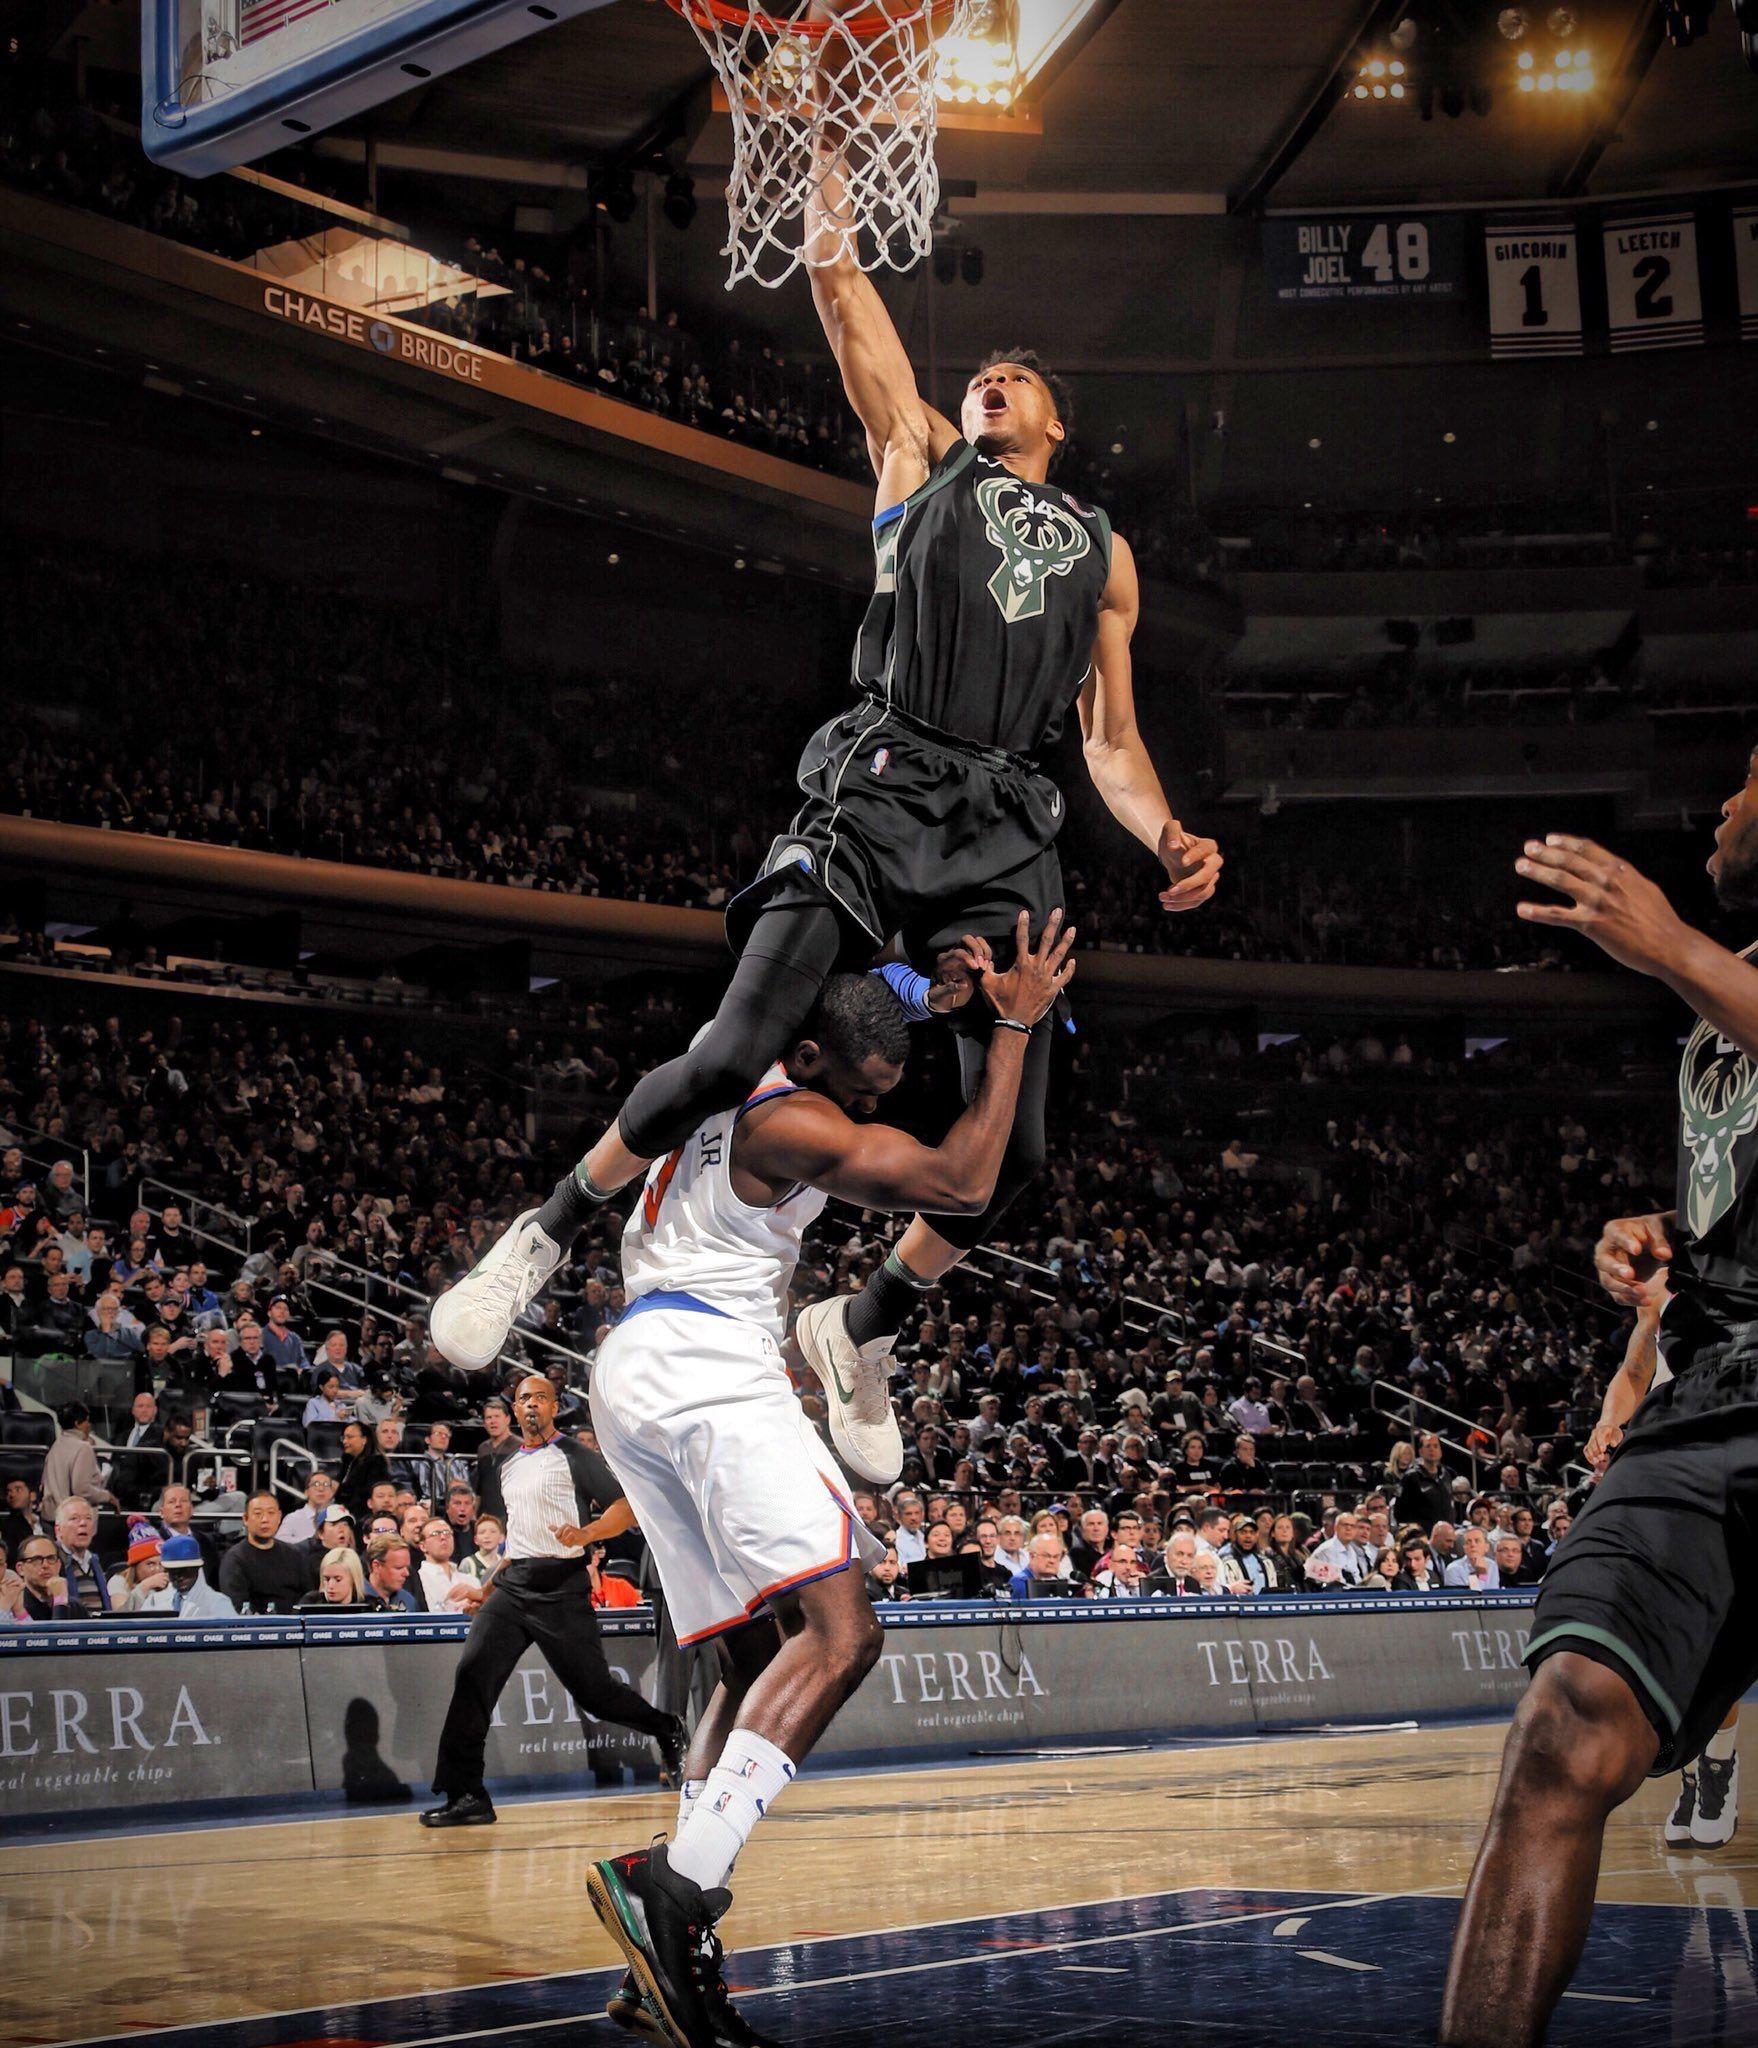 Best Getty Photos of Giannis dagger dunk in Game 5